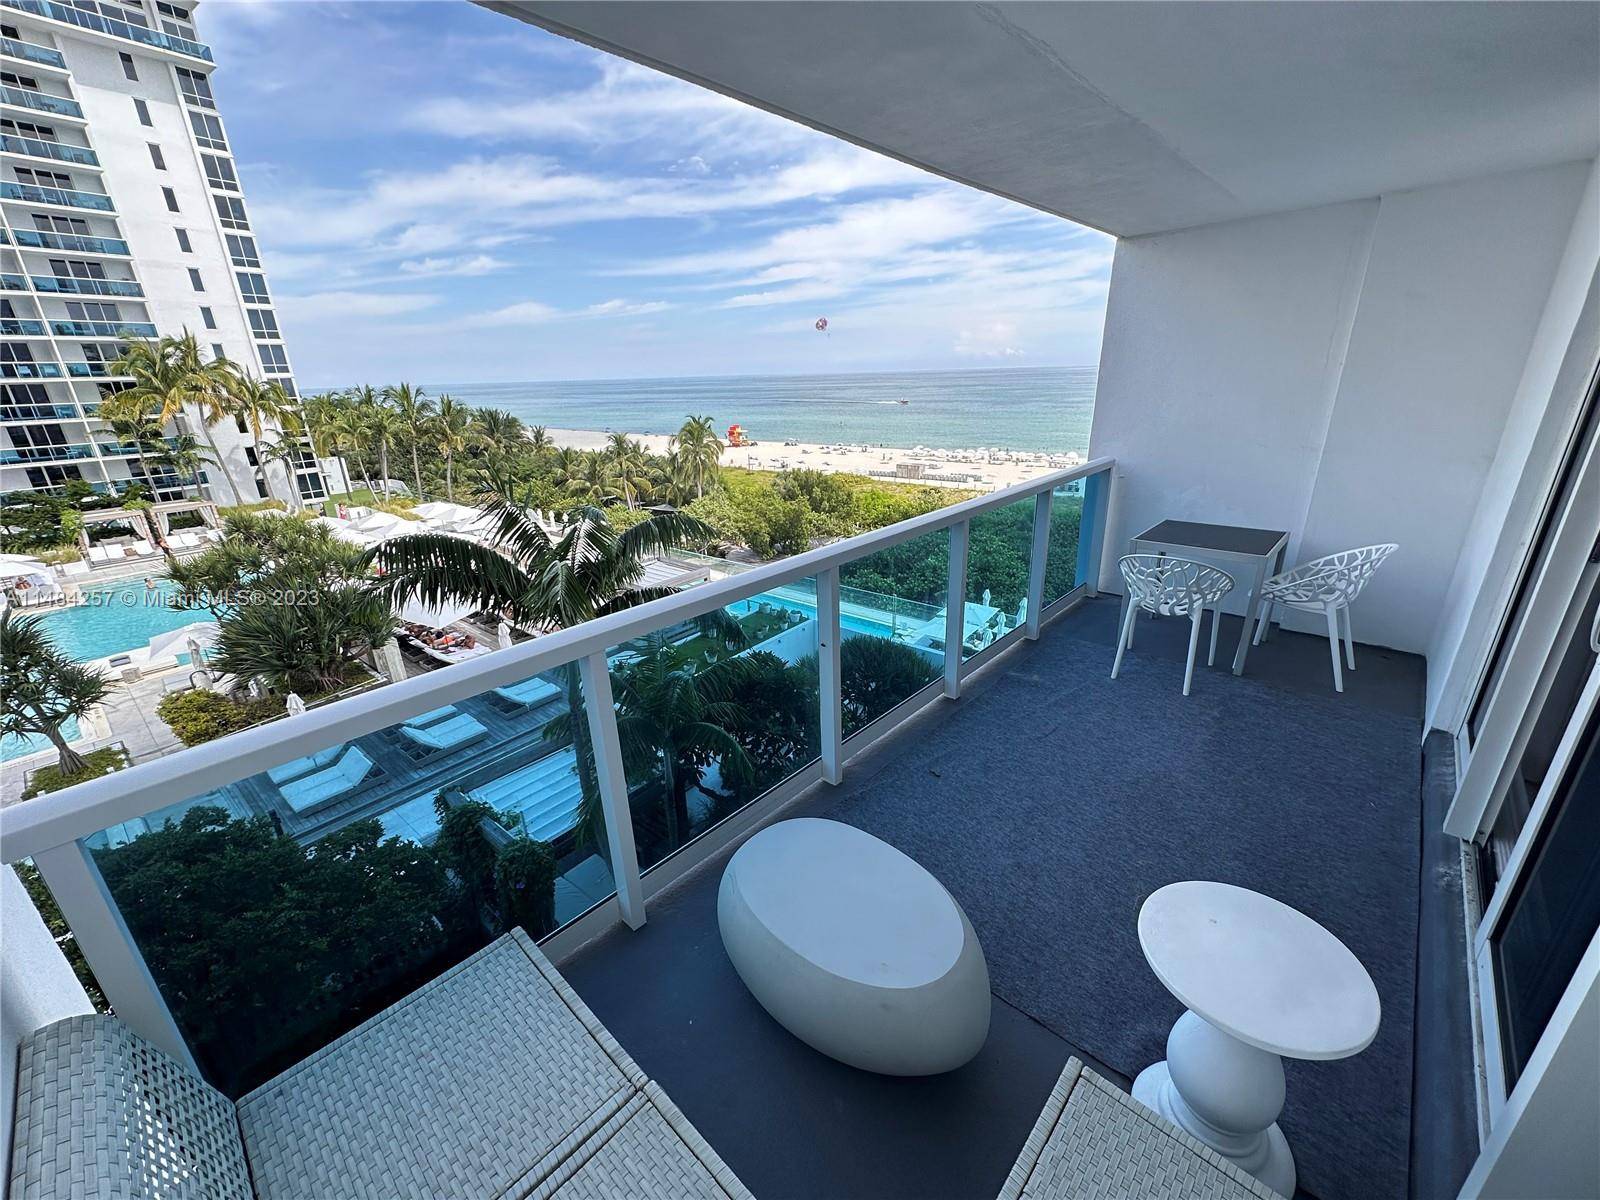 Finest oceanfront FURNISHED studio with OCEAN VIEW BALCONY available for rent in the iconic South Beach Roney Palace.